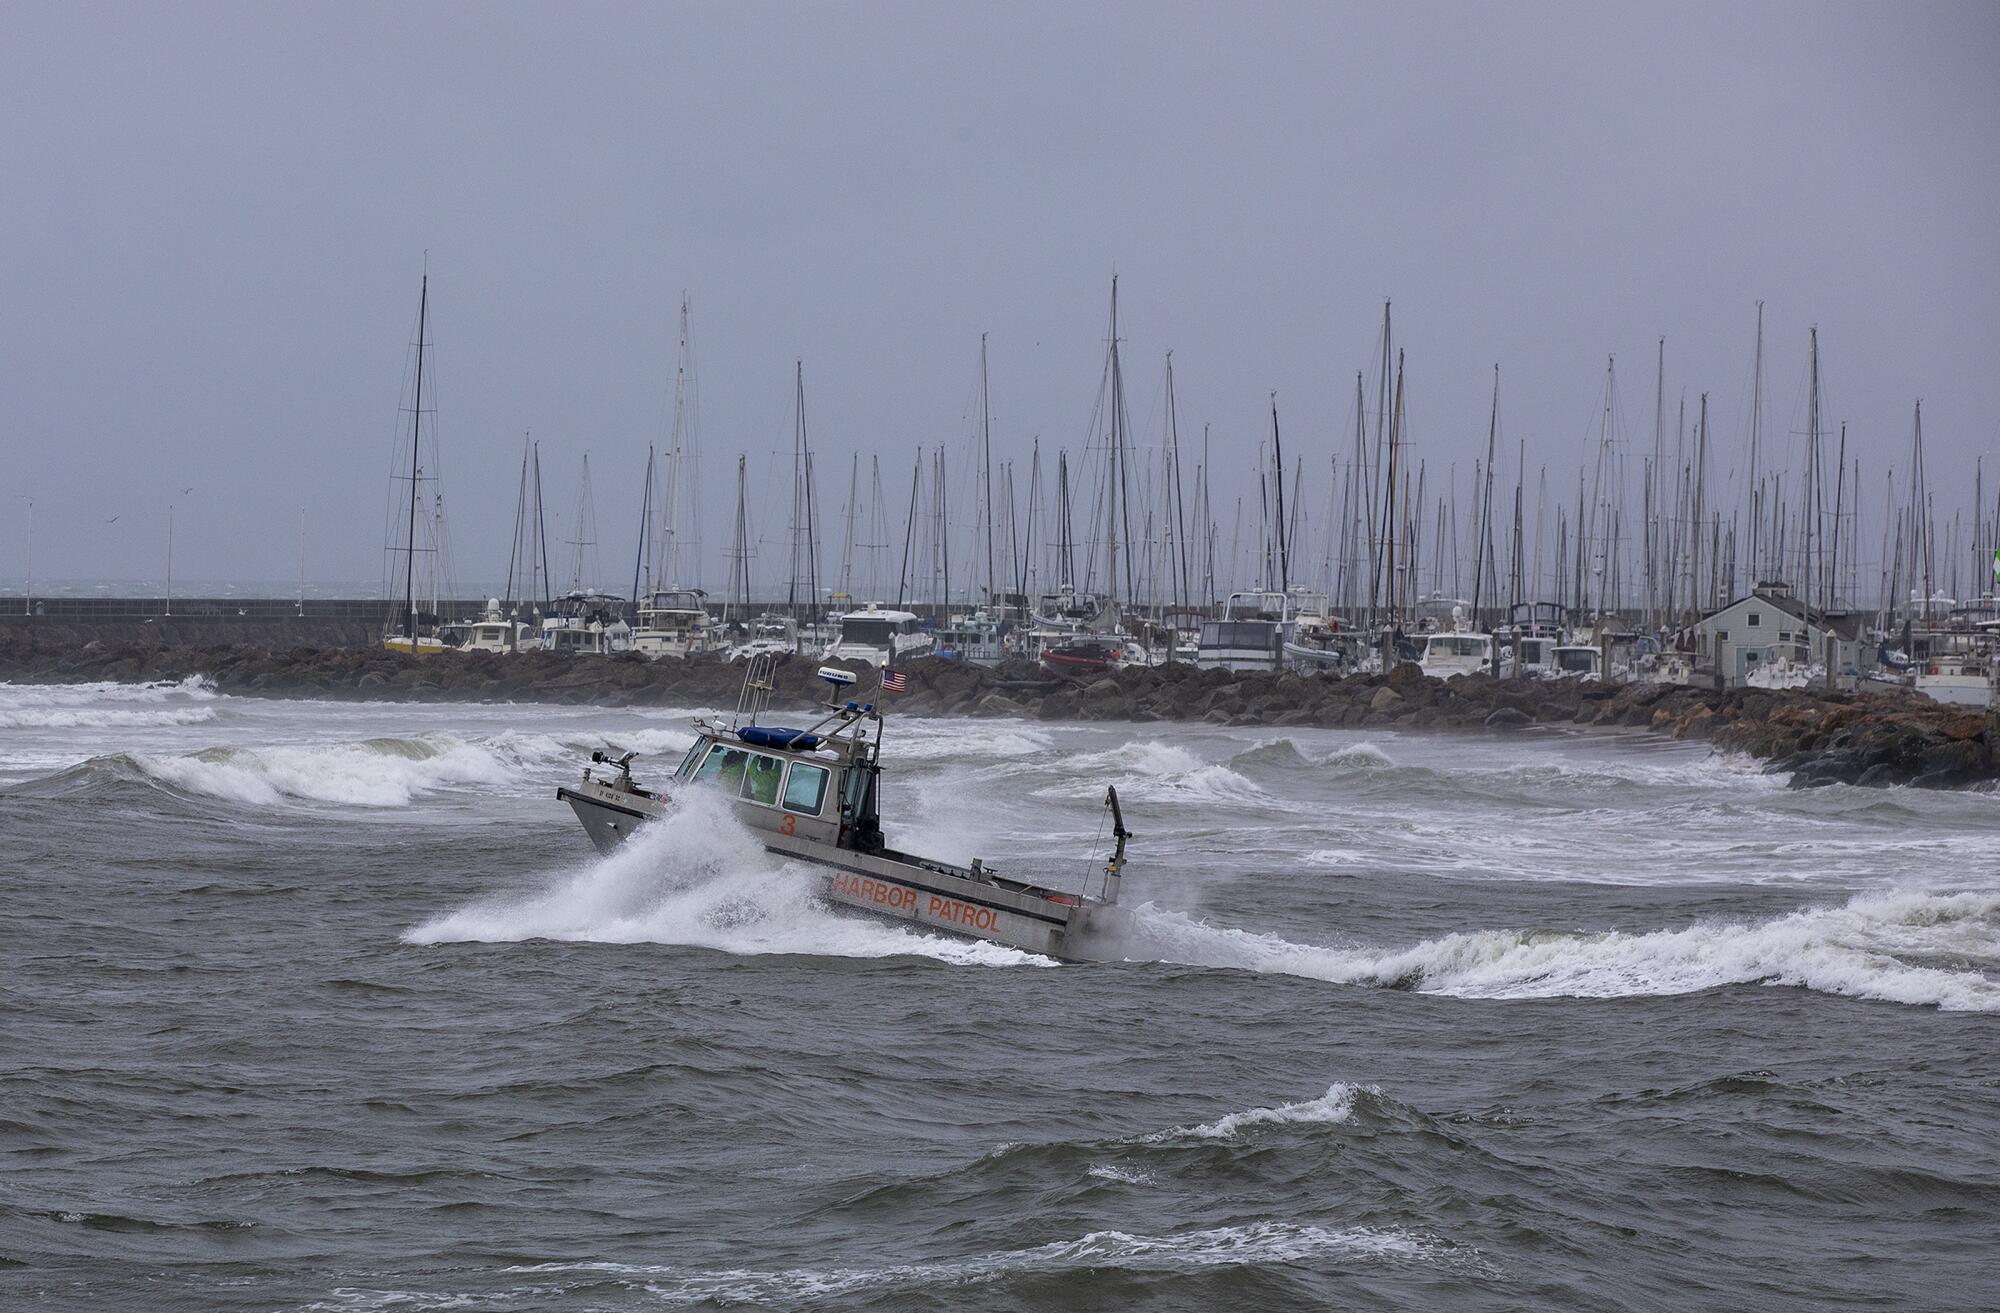 A boat heads out into choppy waters near Stearns Wharf in Santa Barbara on Friday.